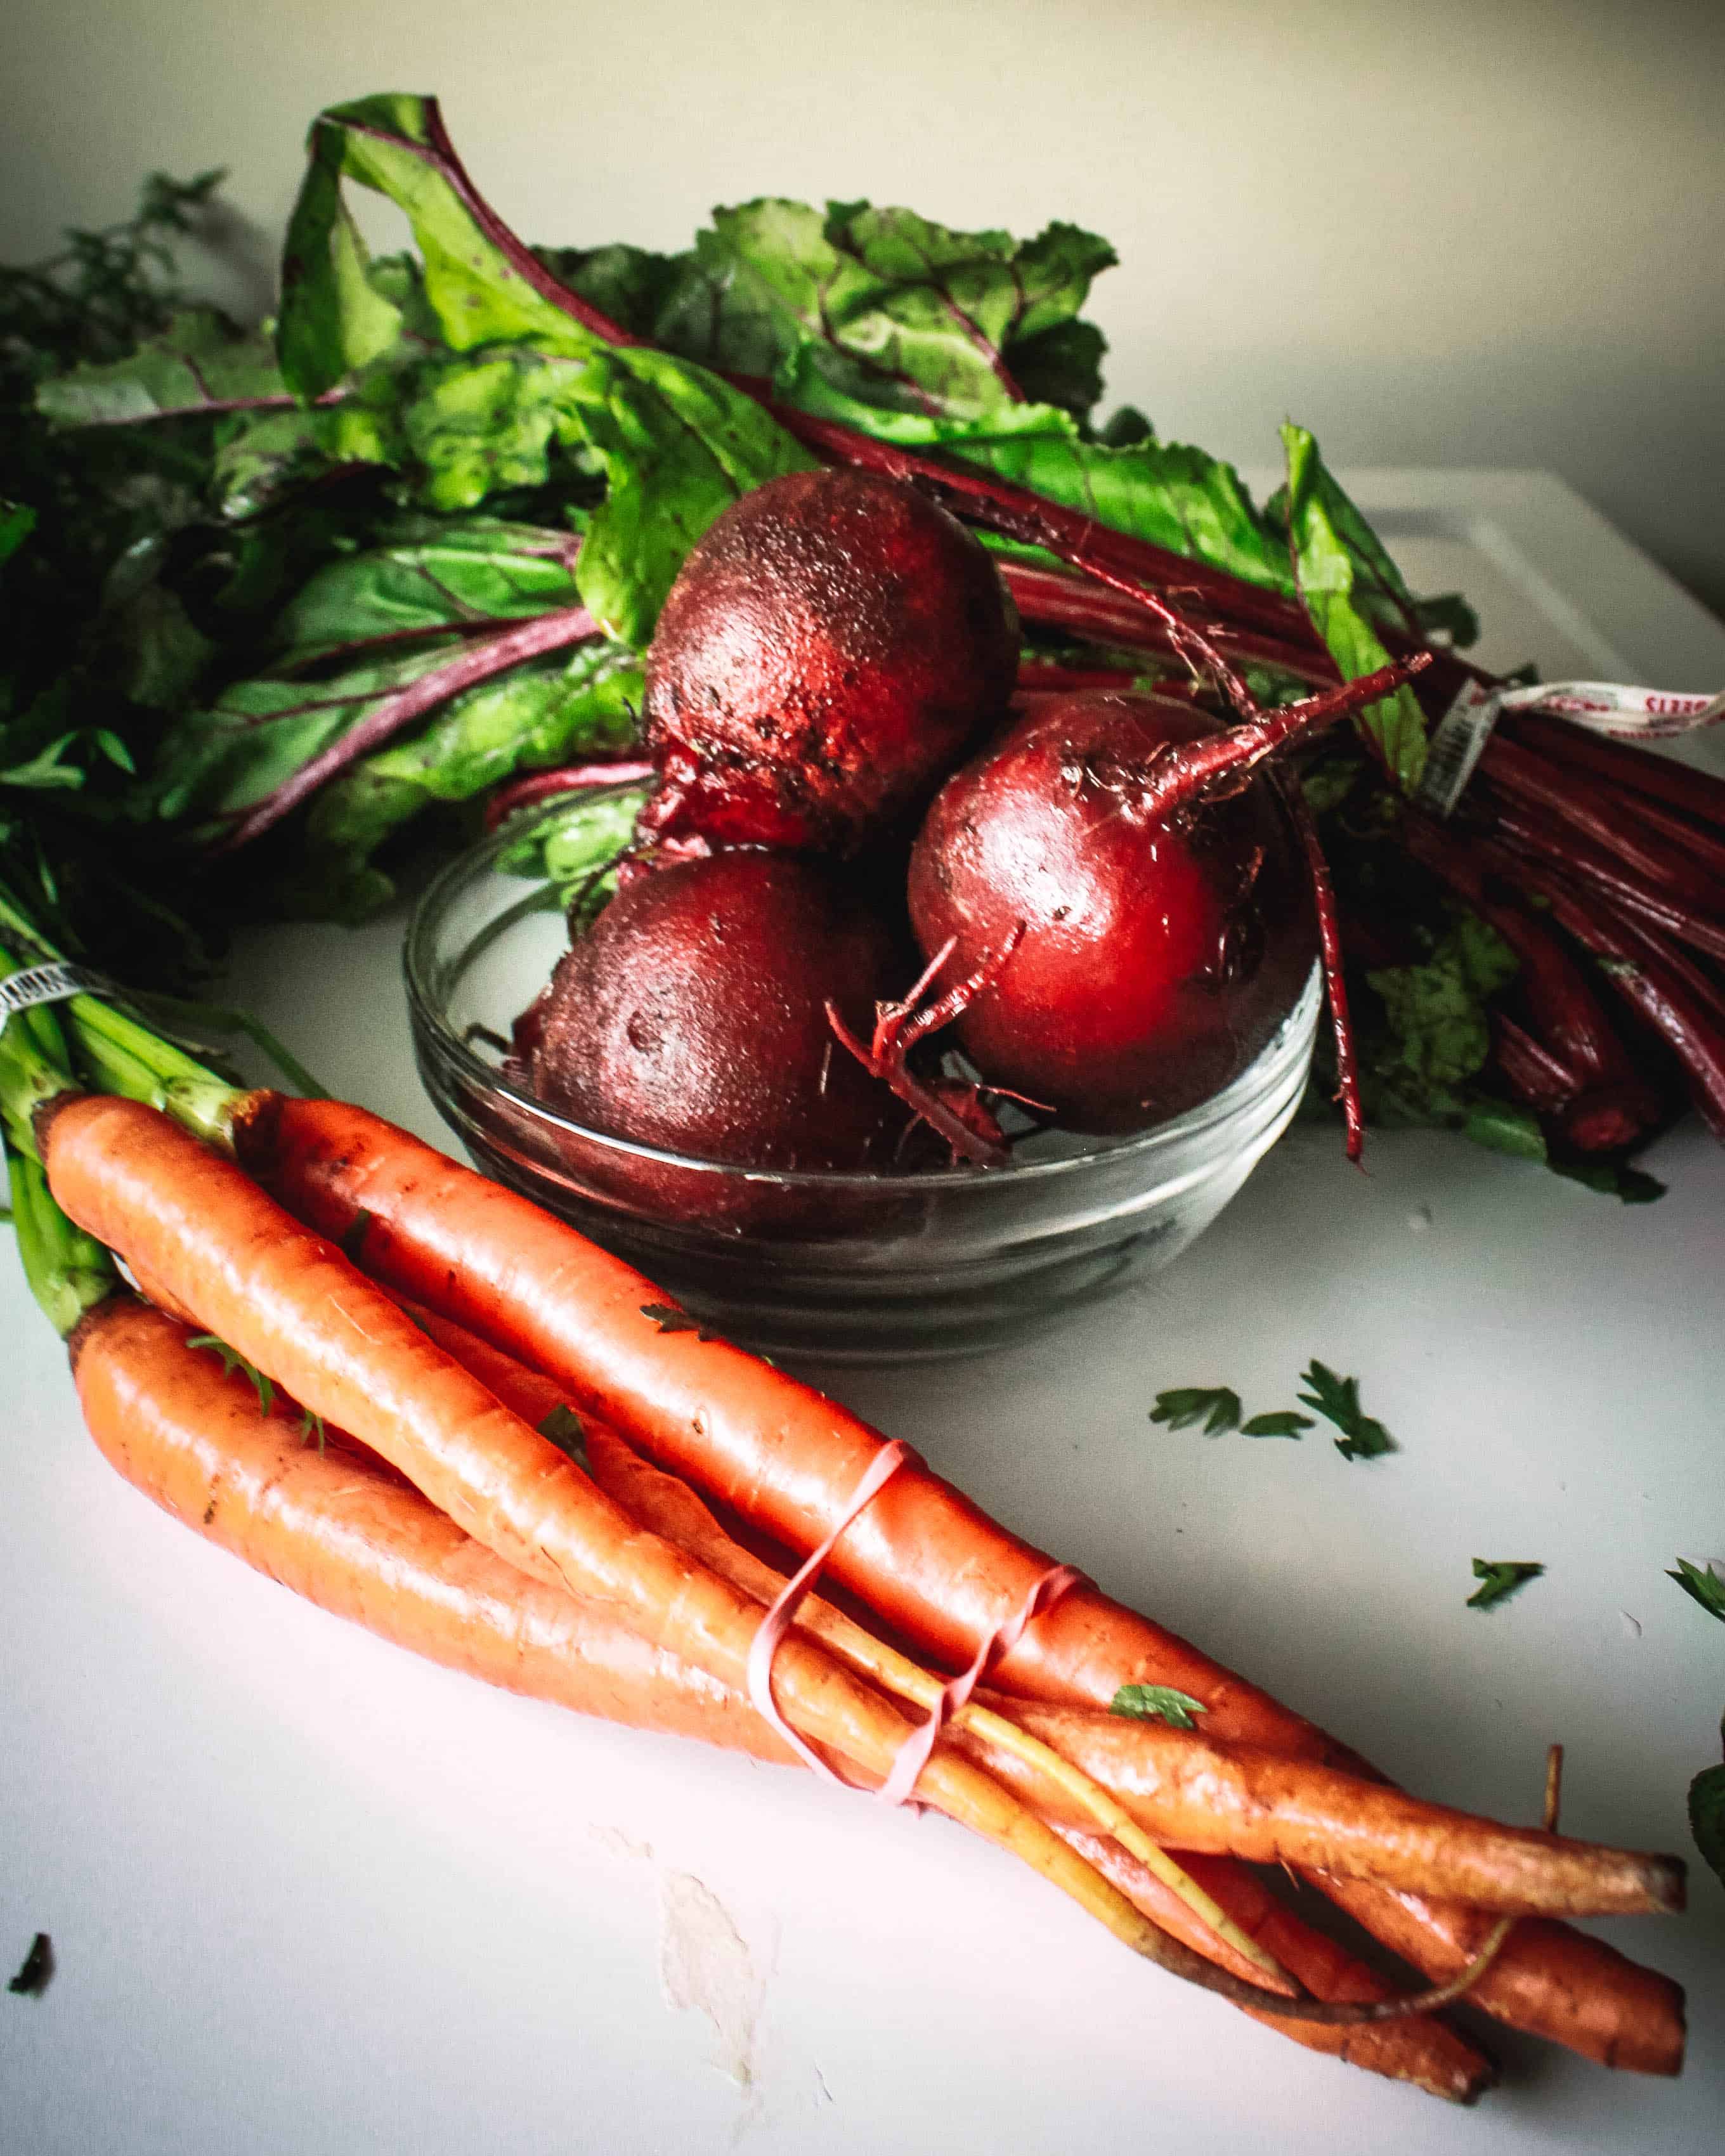 Beets and Carrots on the table